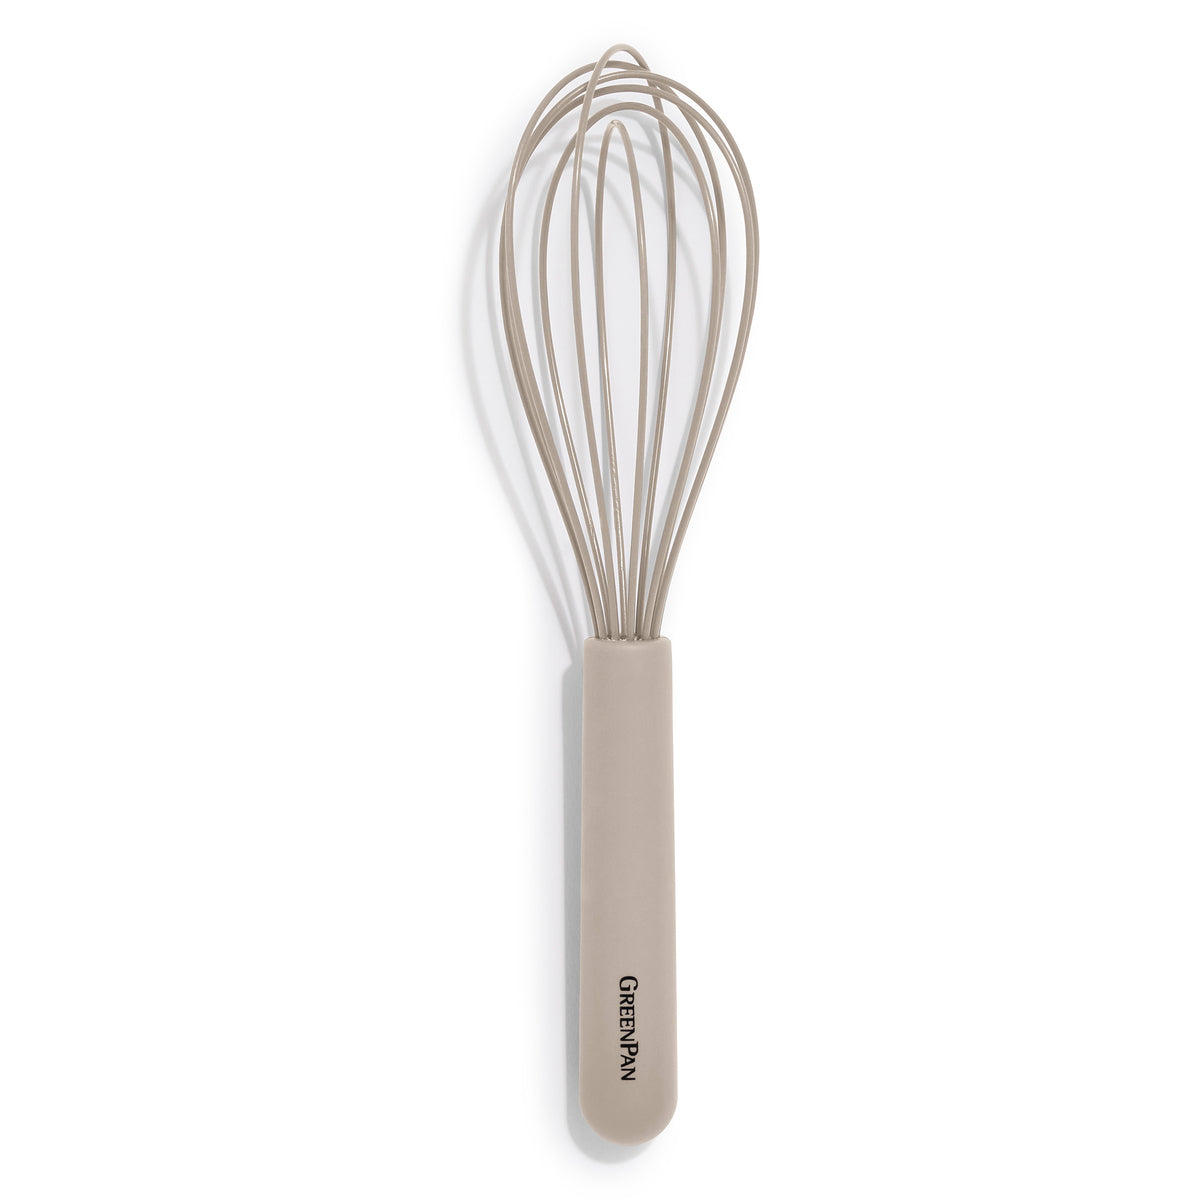 Gir Premium Platinum Silicone Steel Mini Whisk For Cooking Mint Green Color